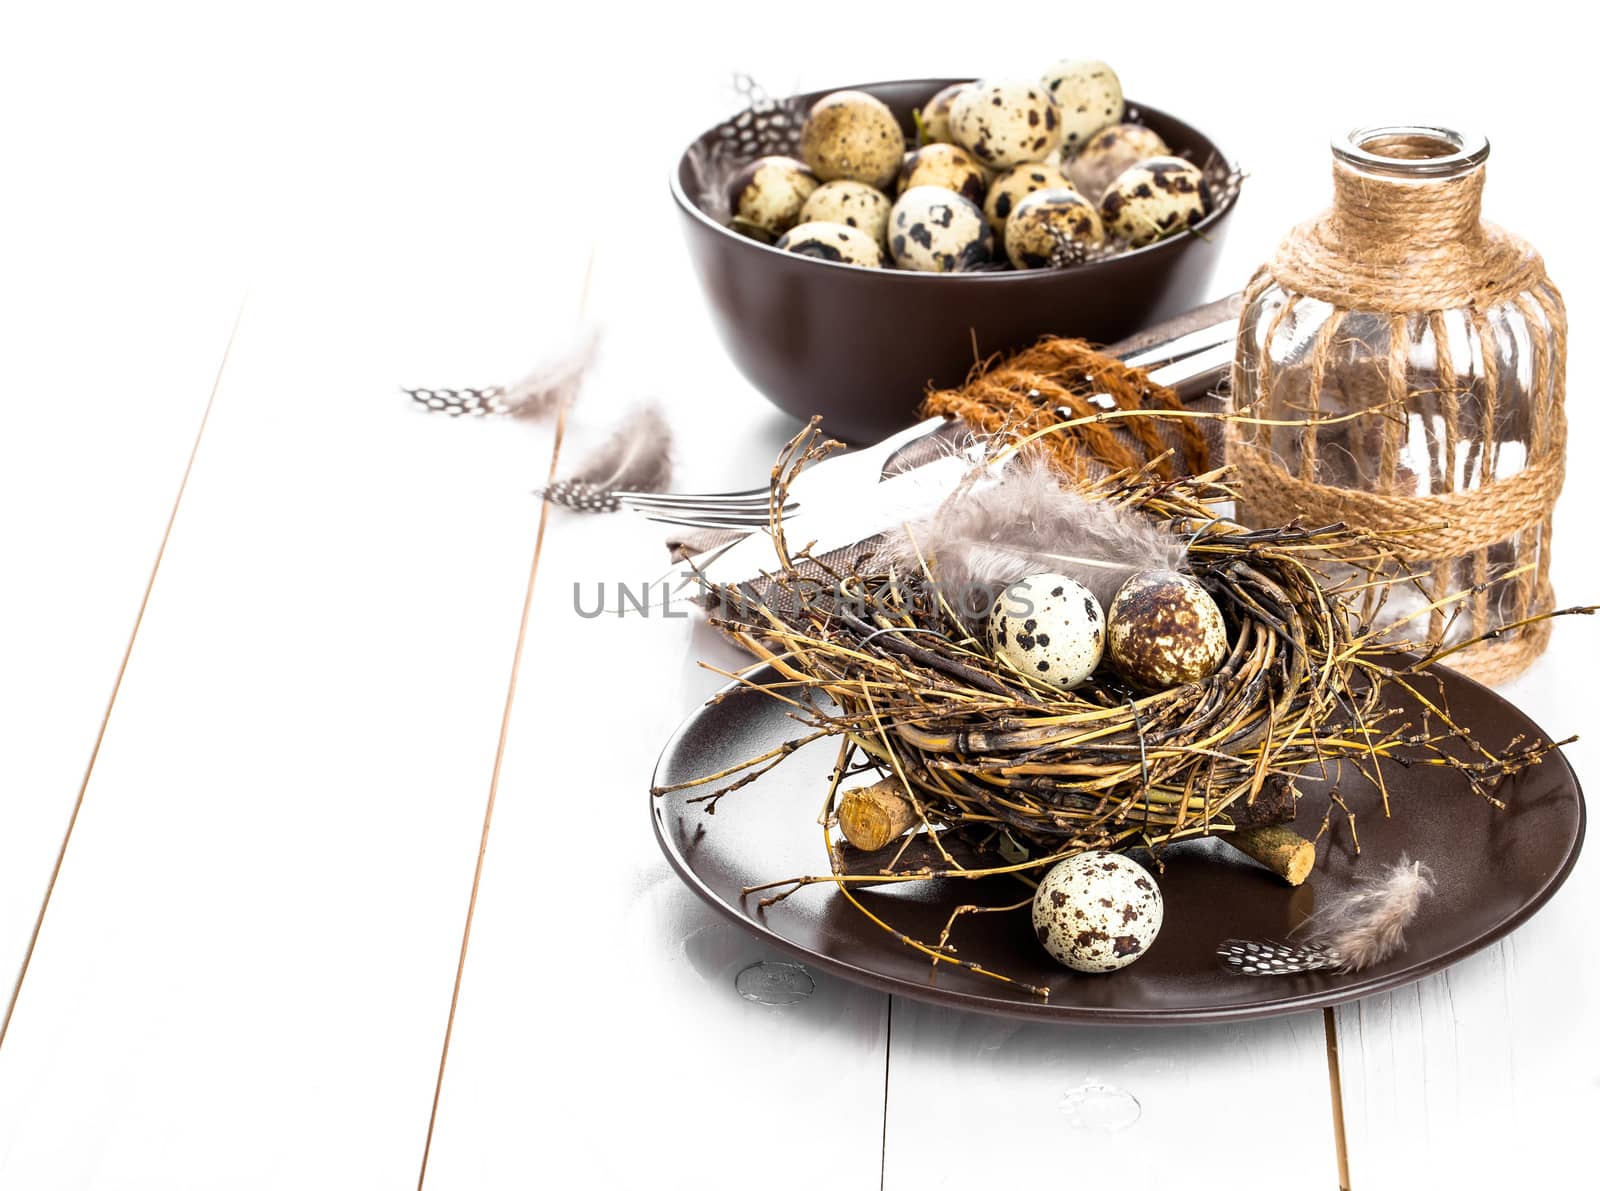 table decoration on white wooden background with quail eggs by motorolka